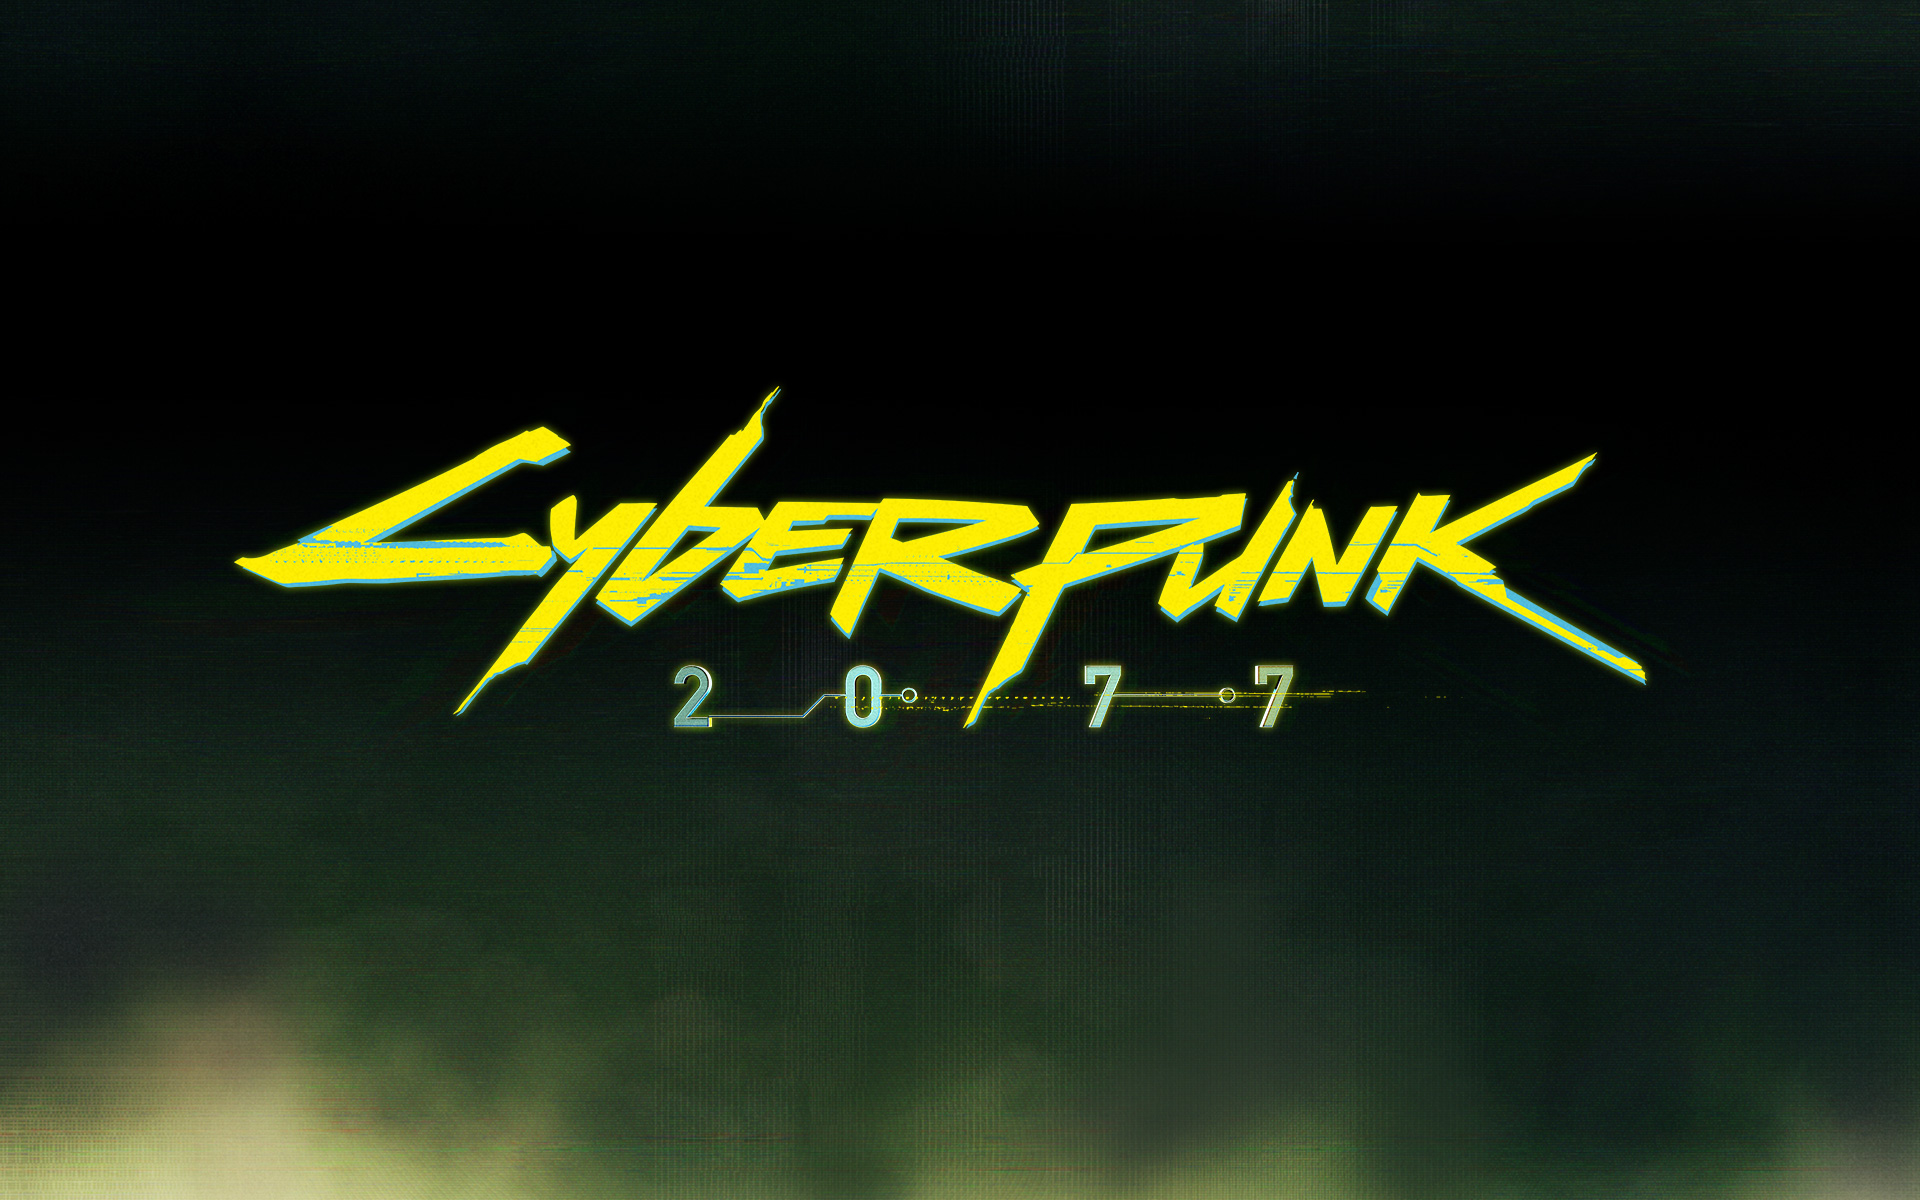 Nice Images Collection: Cyberpunk 2077 Desktop Wallpapers